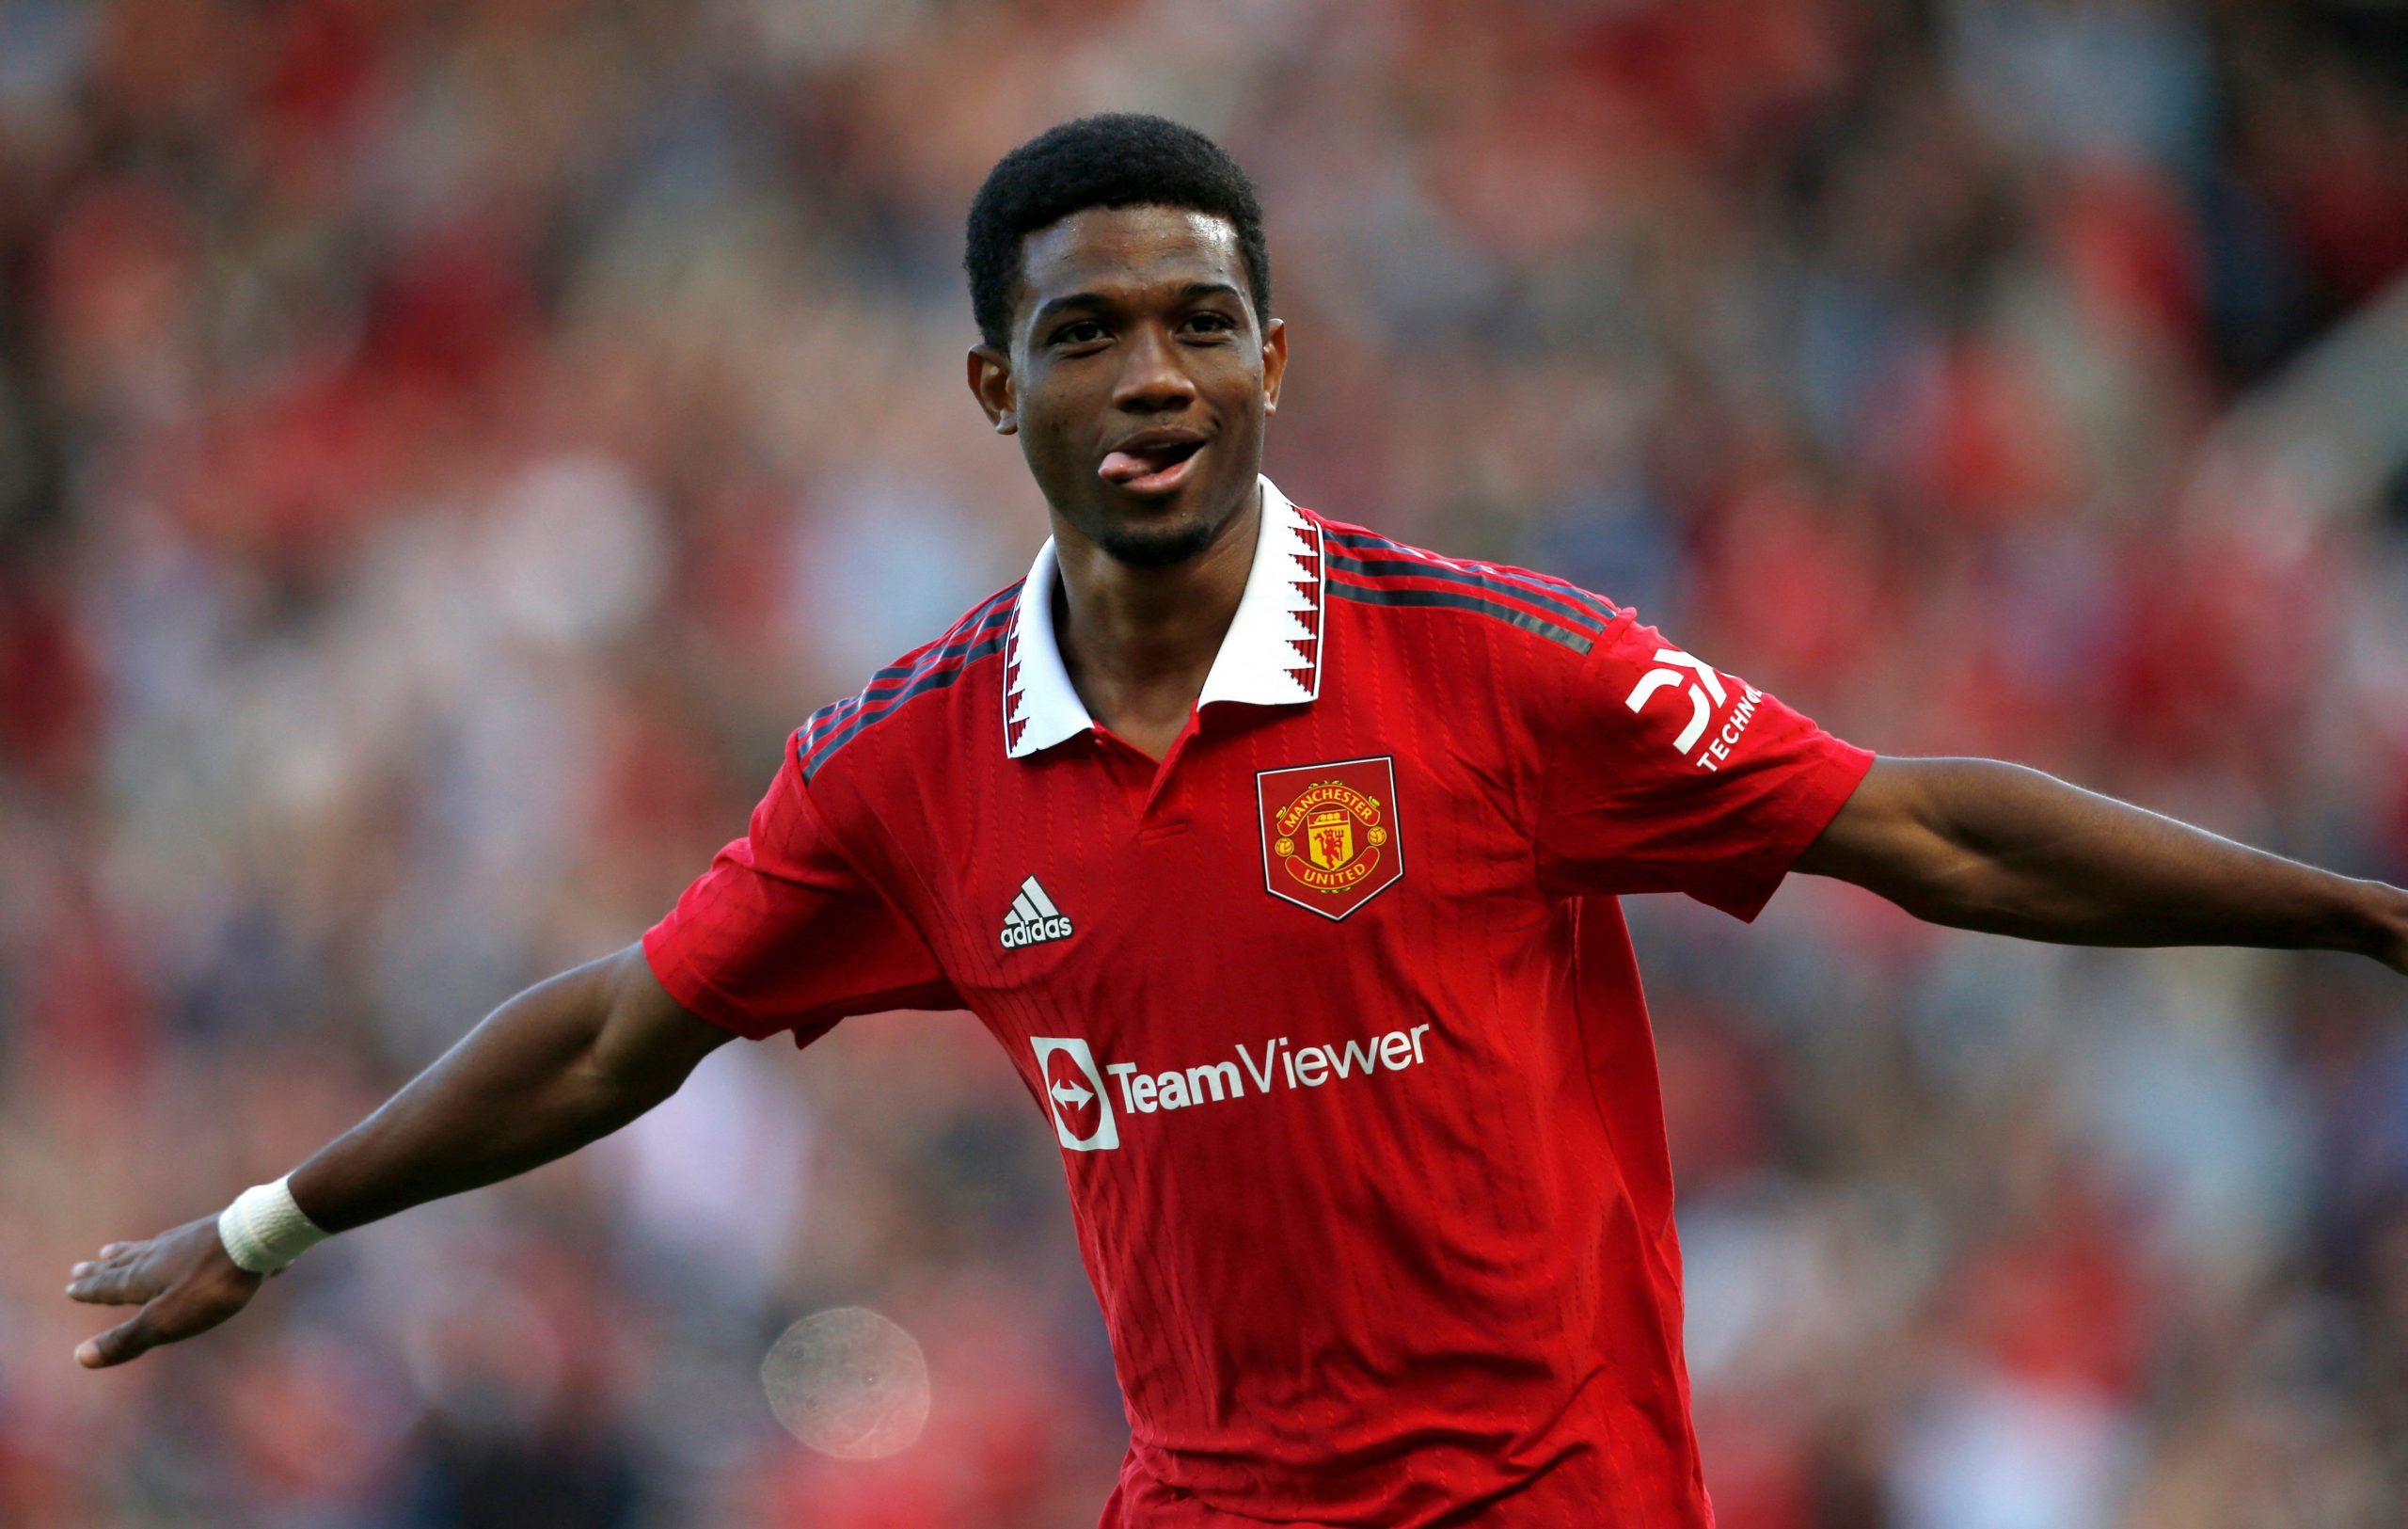 Soccer Football - Pre Season Friendly - Manchester United v Rayo Vallecano - Old Trafford, Manchester, Britain - July 31, 2022 Manchester United's Amad Diallo celebrates scoring their first goal Action Images via Reuters/Ed Sykes